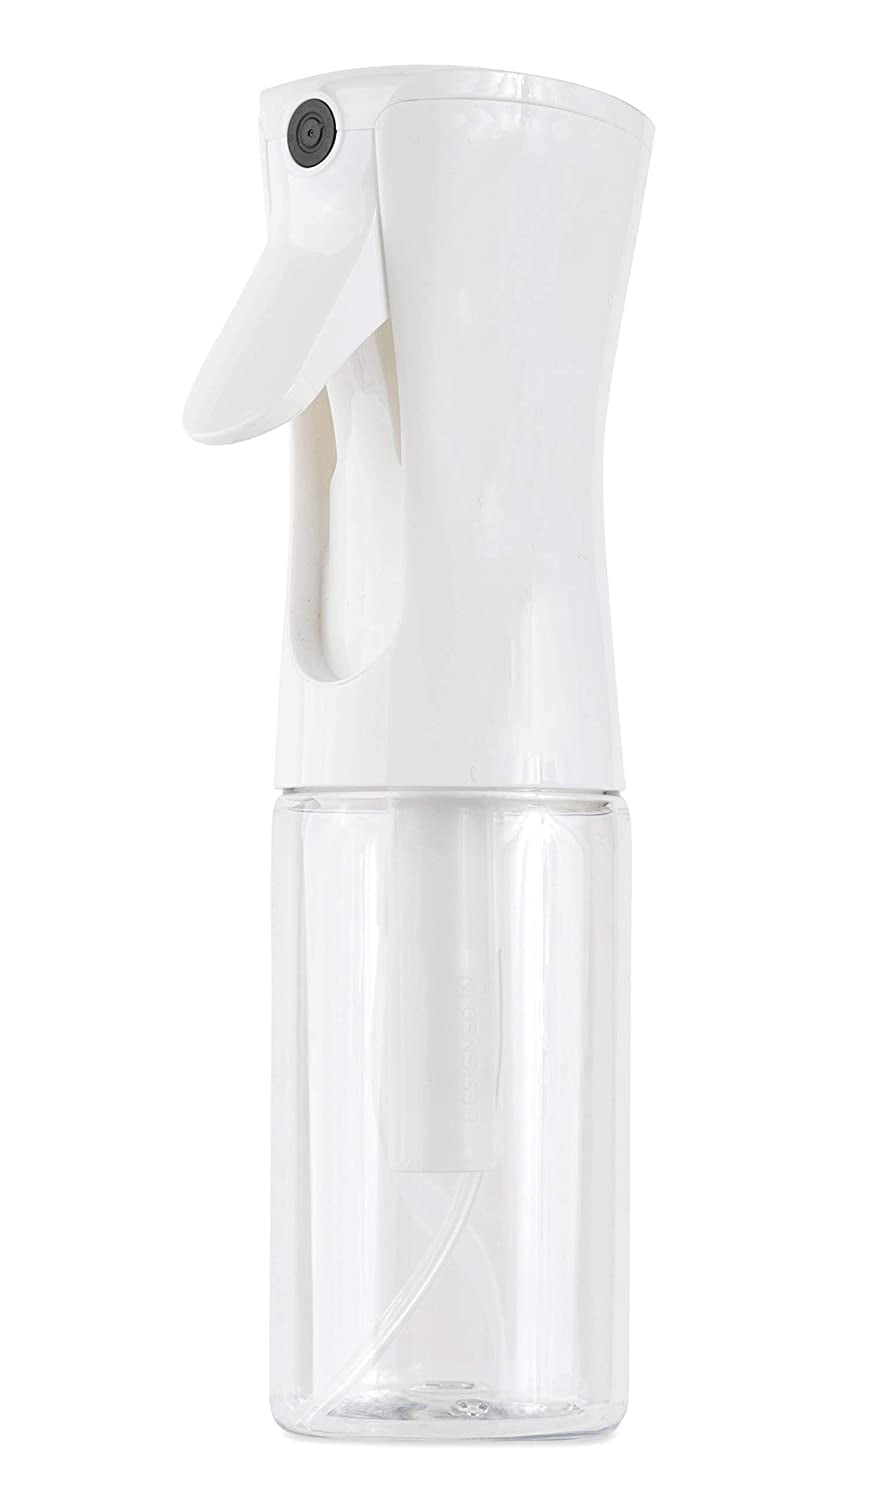 Ultra Fine - Durable - Empty Continuous Spray Bottle - Water Mister For  Hairstyling, Plants, Cleaning, Cooking, Misting & Skin Care